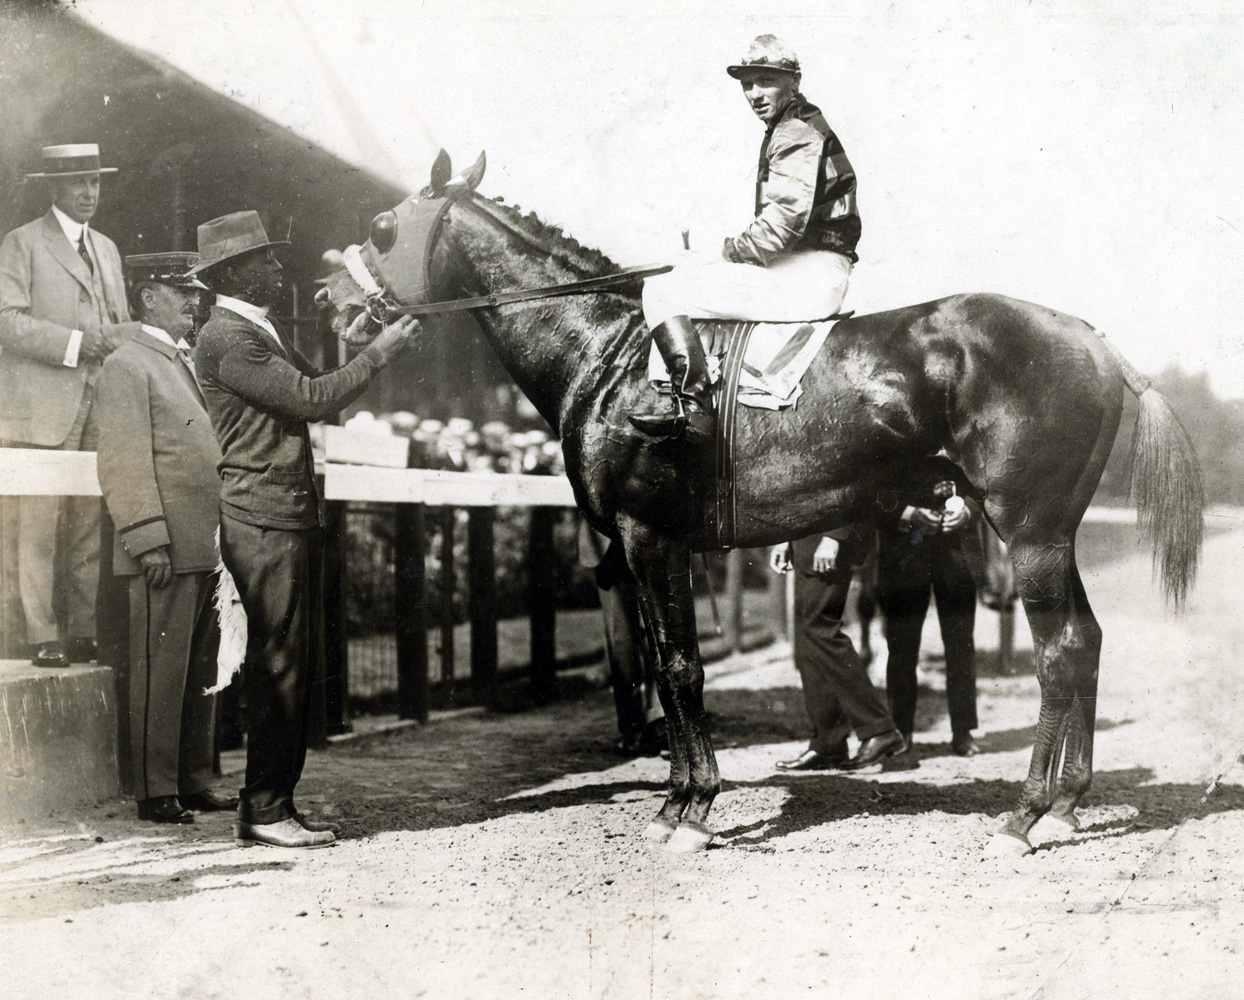 Earl Sande and Sir Barton in the winner's circle at Saratoga (Museum Collection)